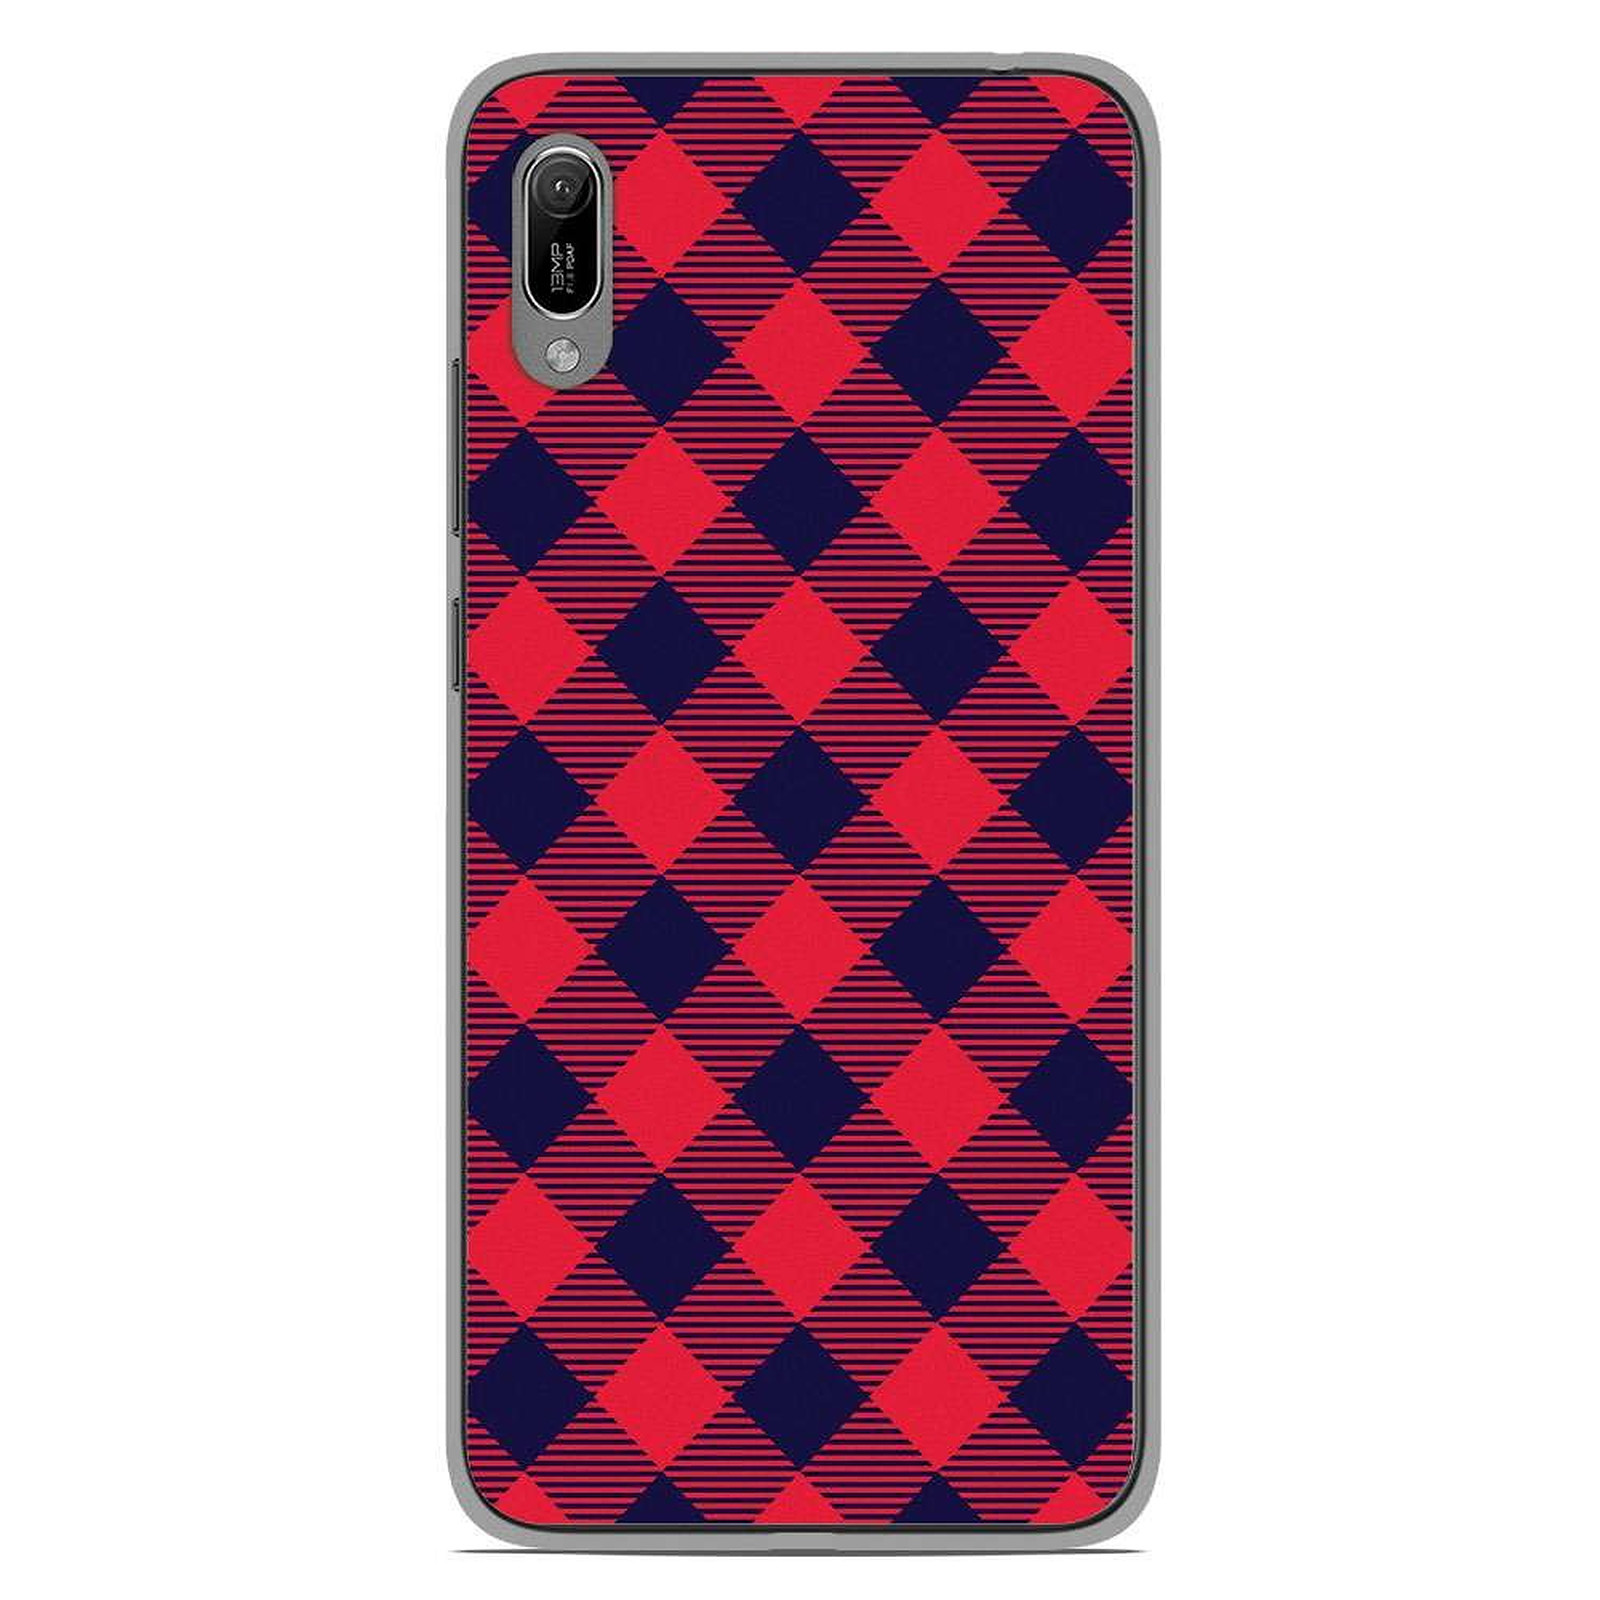 1001 Coques Coque silicone gel Huawei Y6 2019 motif Tartan Rouge - Coque telephone 1001Coques